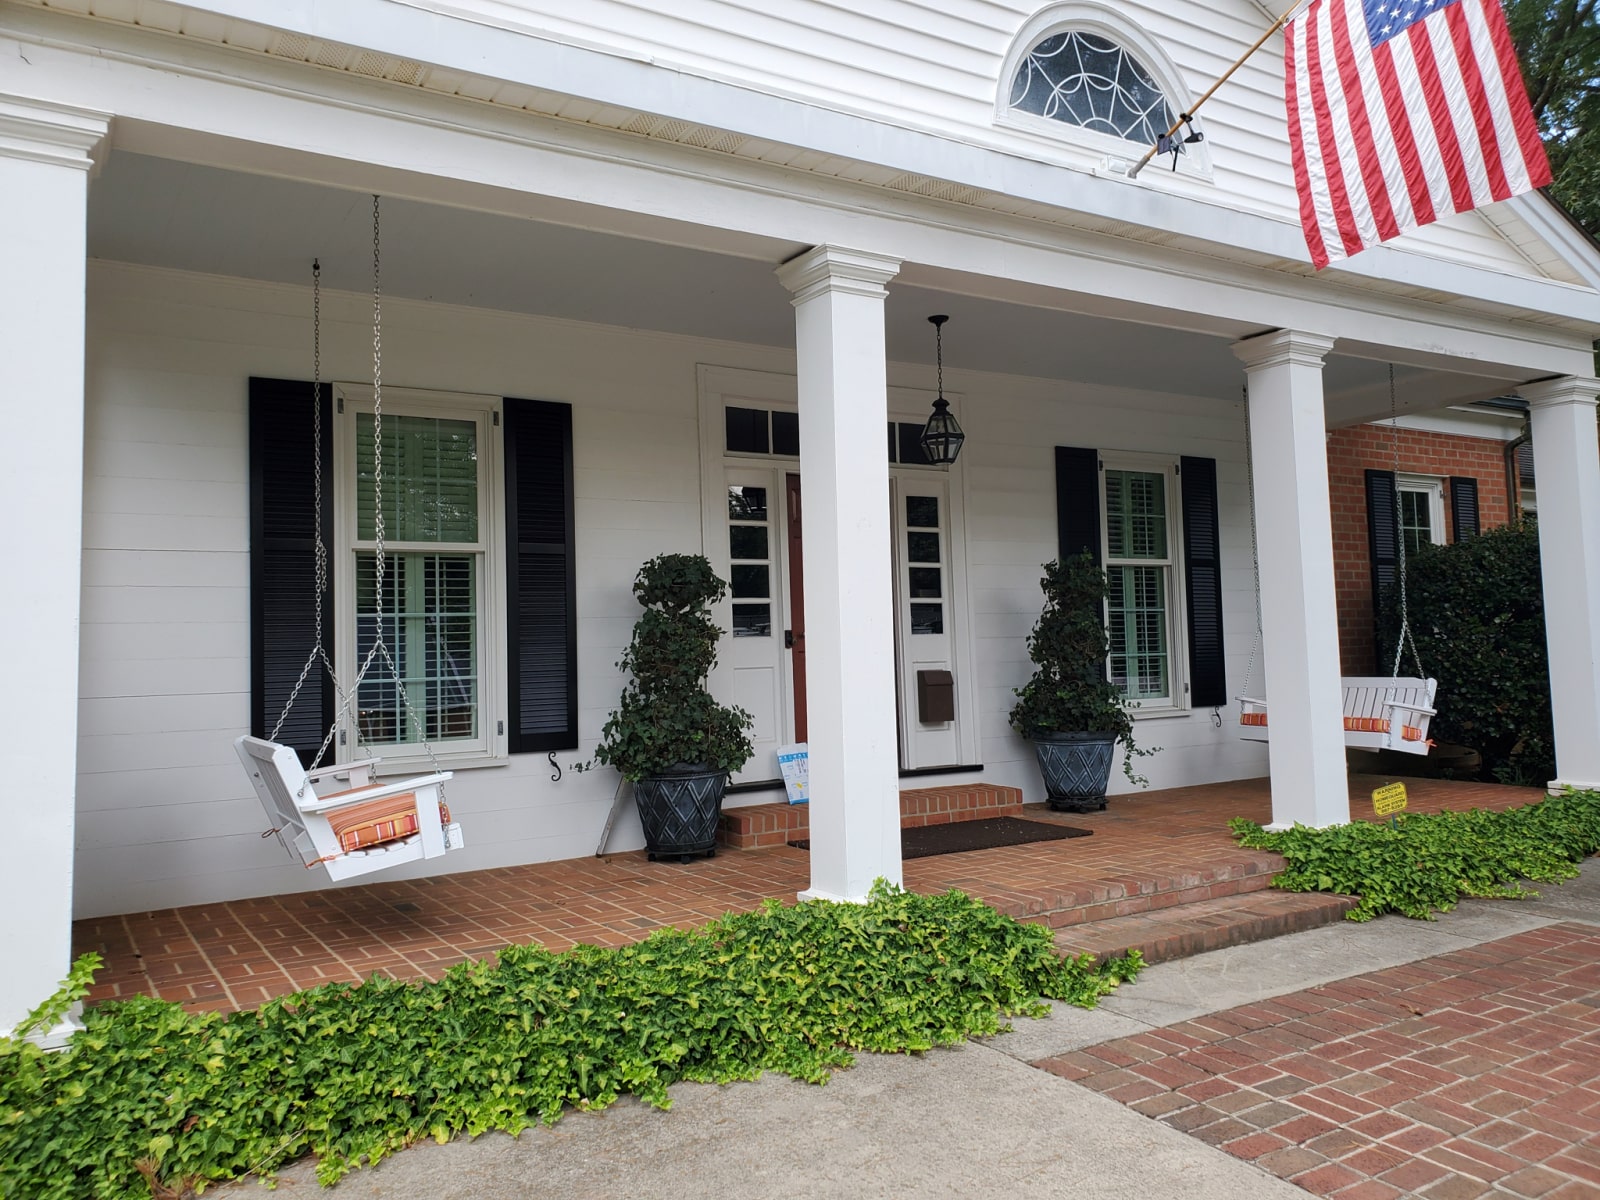 Fixed Louvered Shutters in Clemson, SC